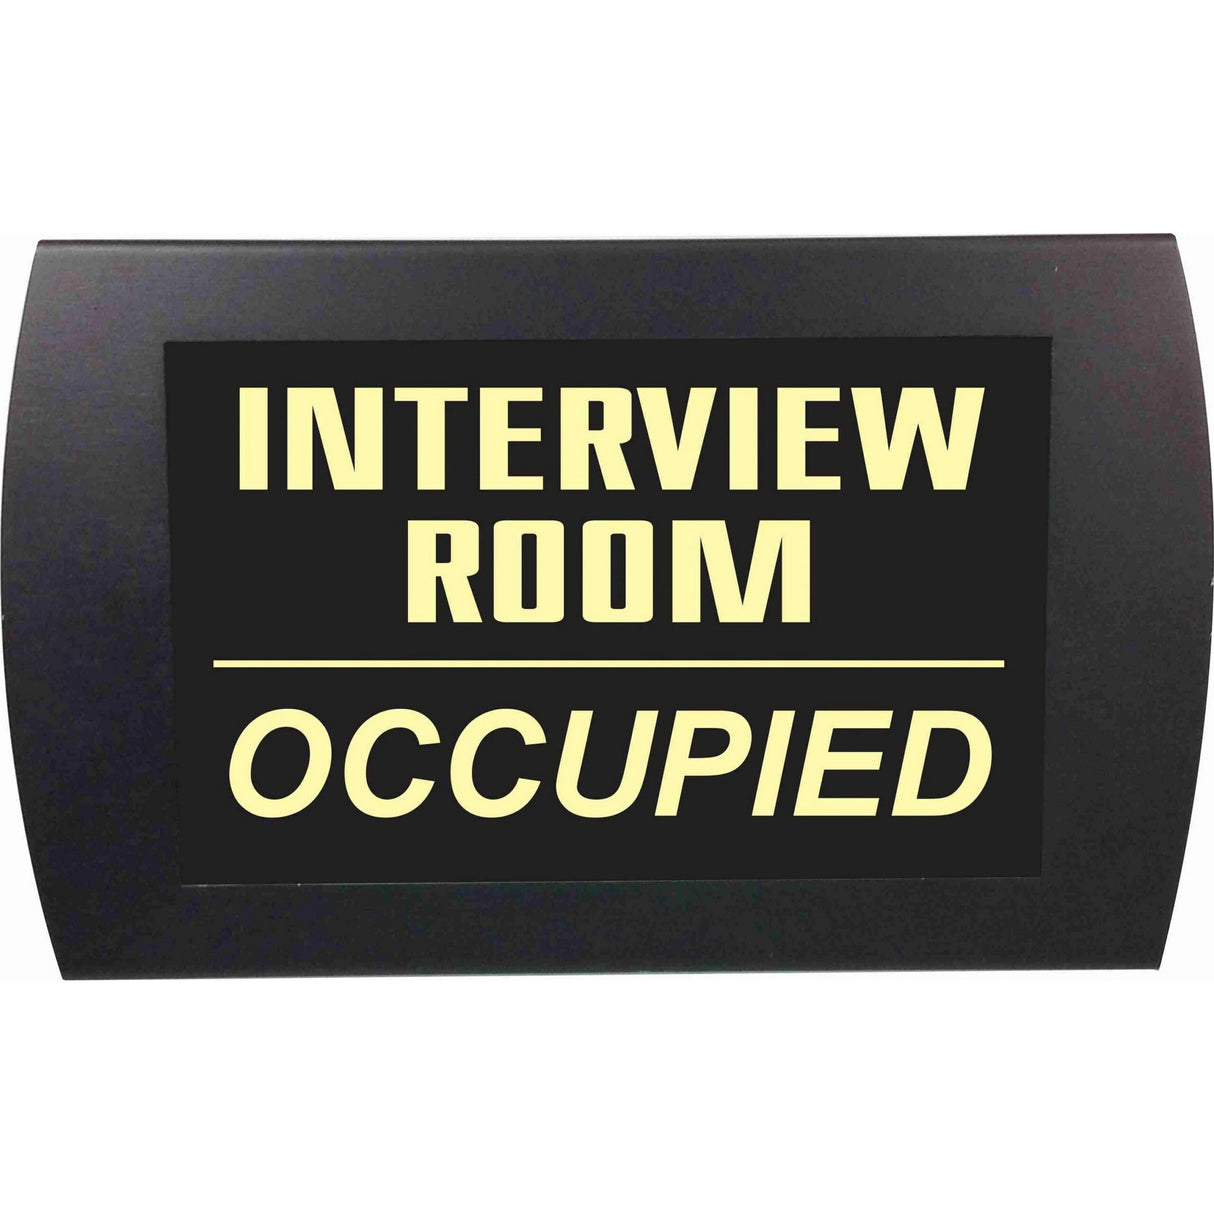 American Recorder Technologies OAS-2055M "INTERVIEW ROOM OCCUPIED" LED Lighted Sign, Yellow